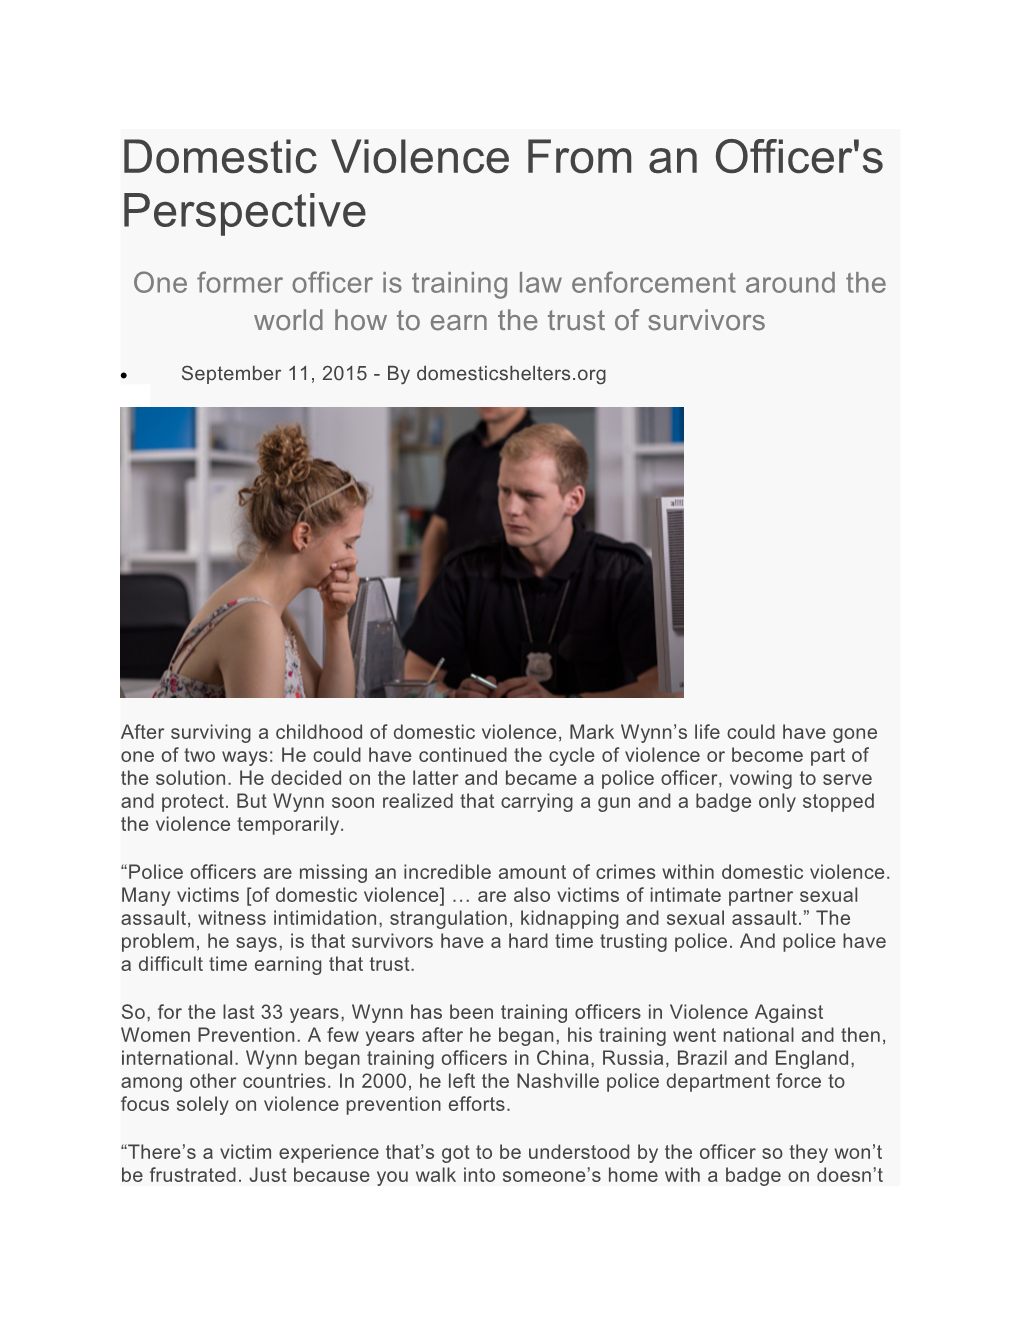 Domestic Violence from an Officer's Perspective